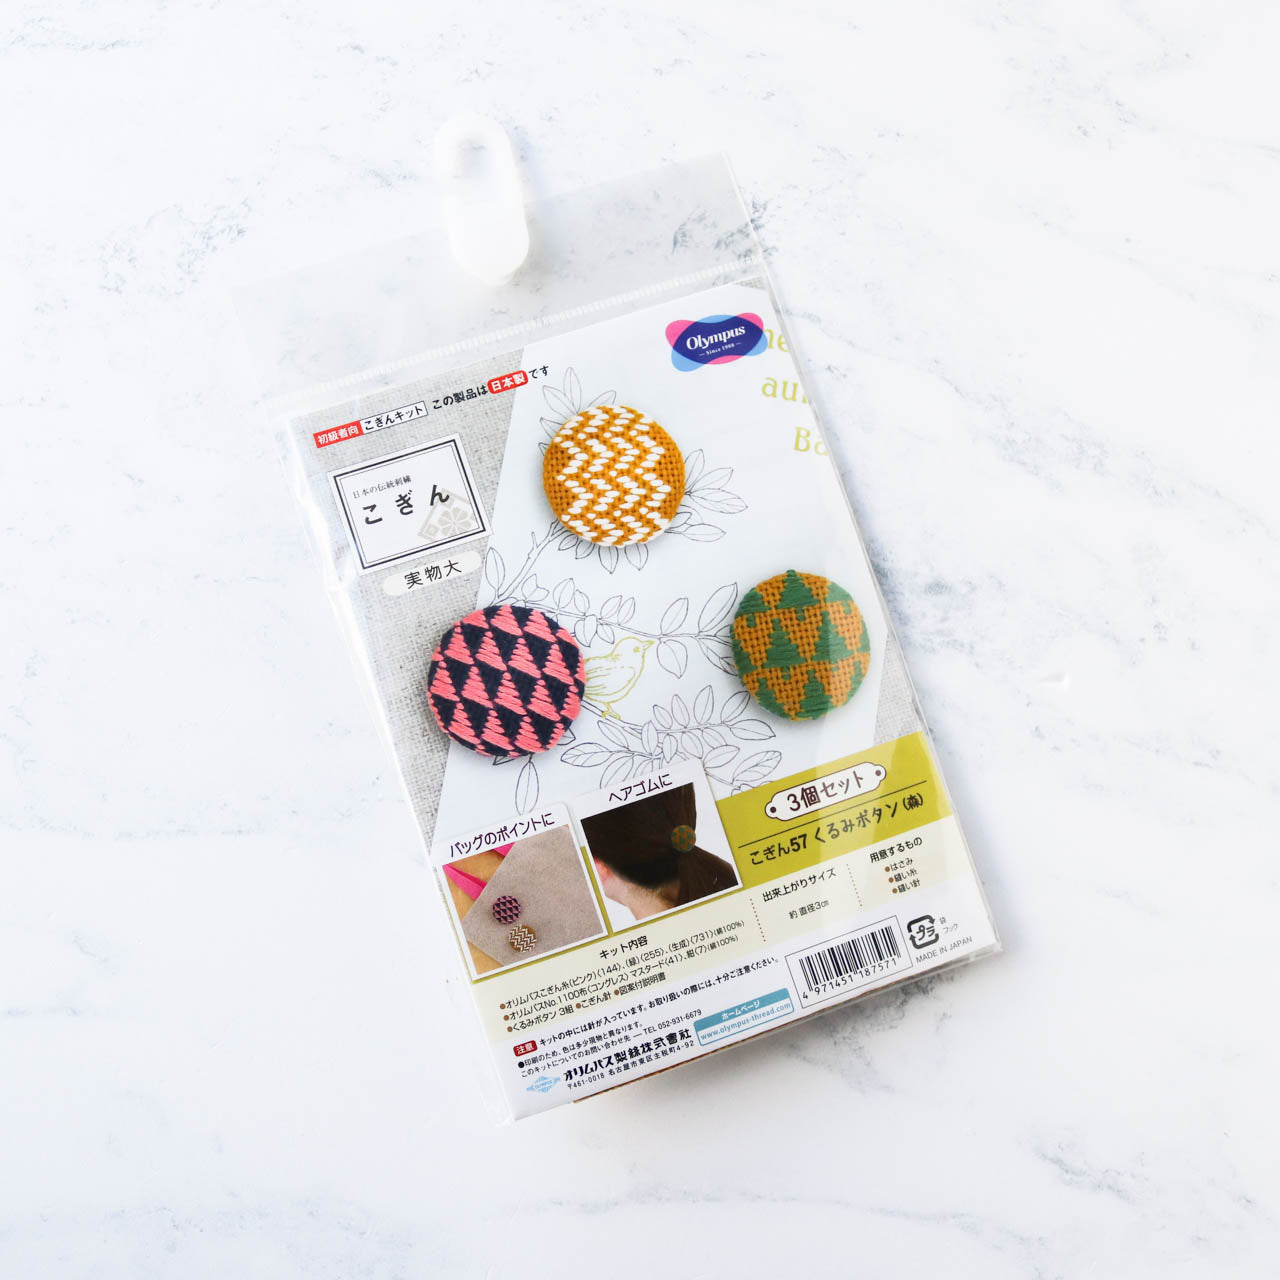 Kogin Embroidery Covered Button Kit - Geometric Set 3